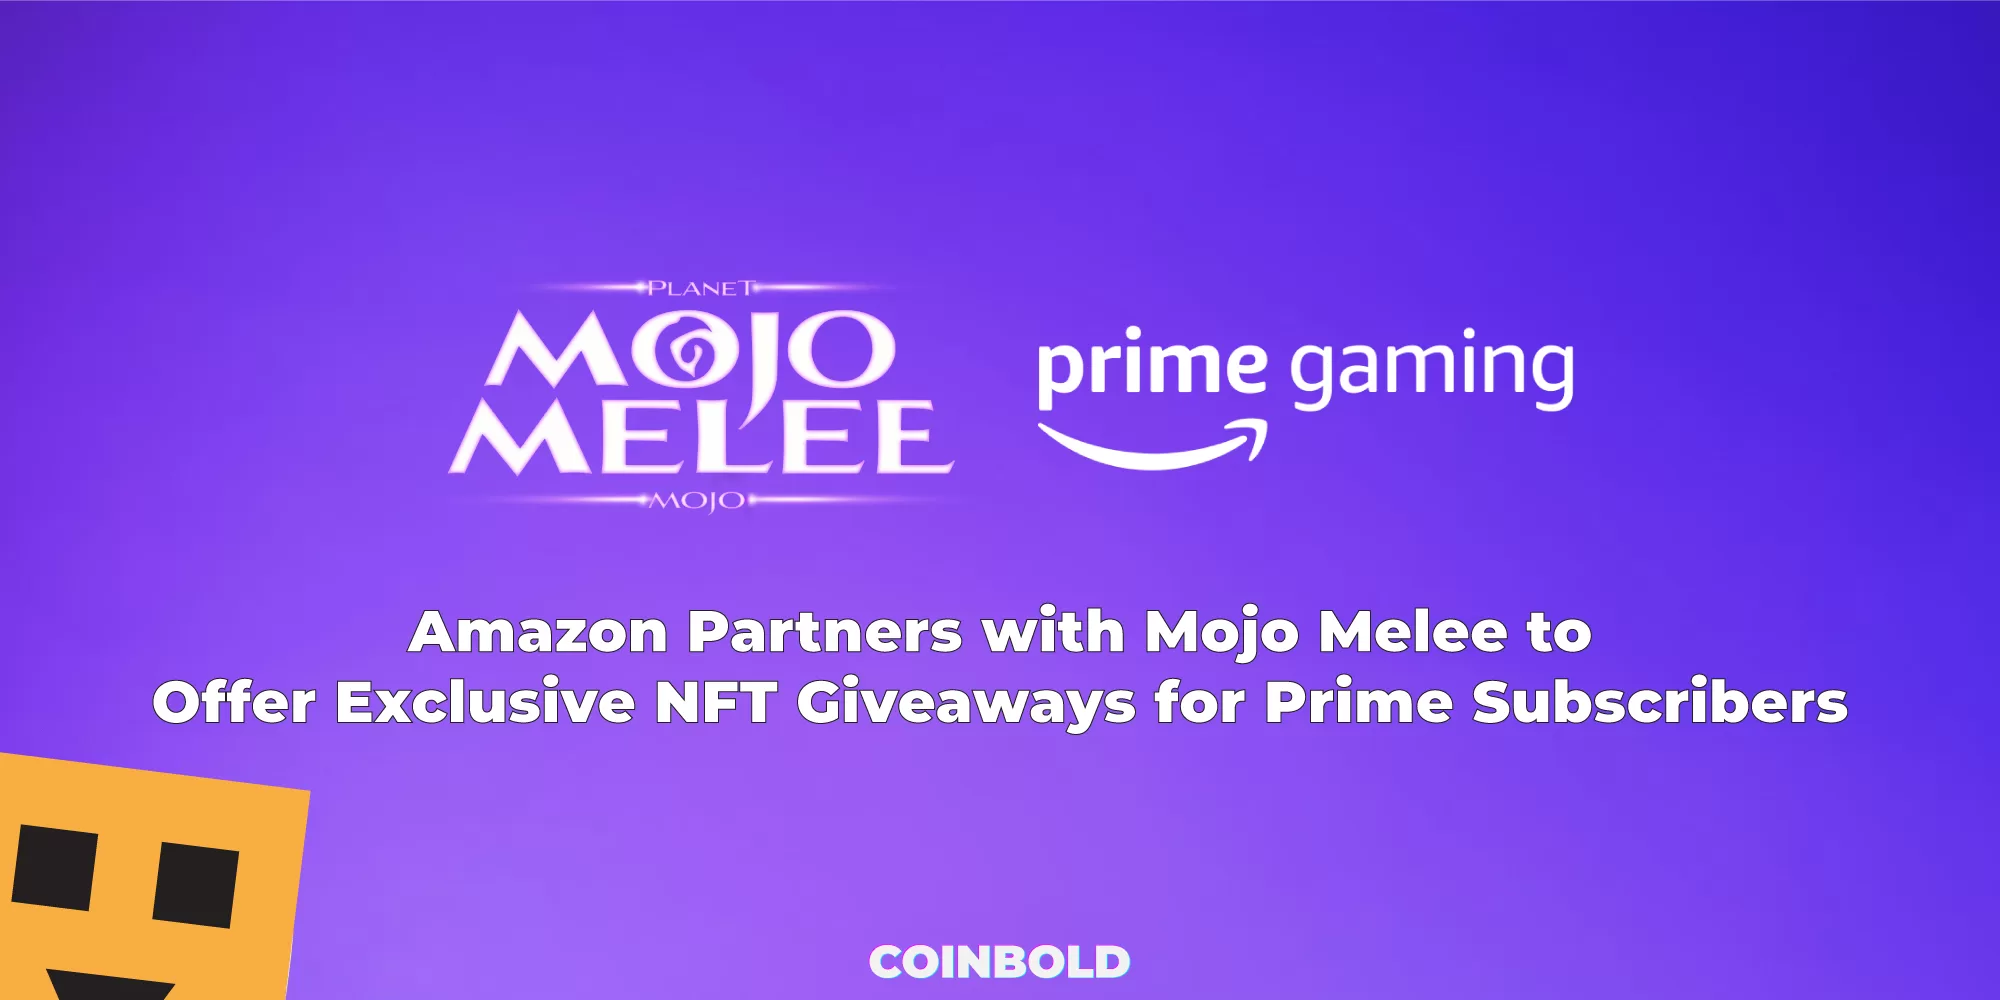 Amazon Partners with Mojo Melee to Offer Exclusive NFT Giveaways for Prime Subscribers